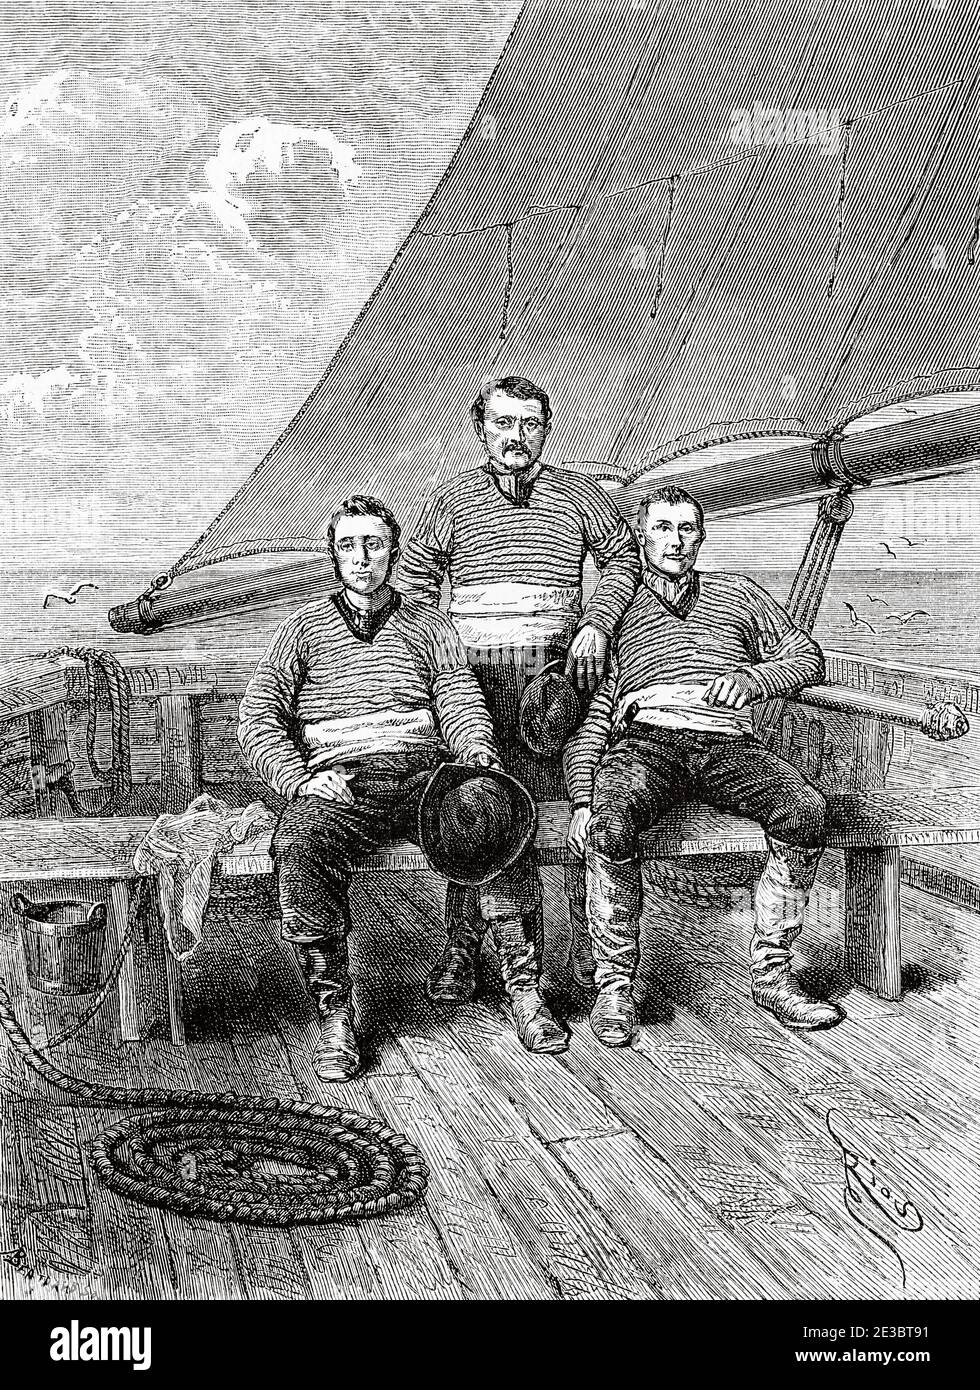 Crew of the expedition ship. Arctic Ocean, Russia. Europe, 19th century Old engraving illustration trip to the North Pole, from Novaya Zemlya to Yenisei river by Adolf Erik Nordenskiold 1875 Stock Photo